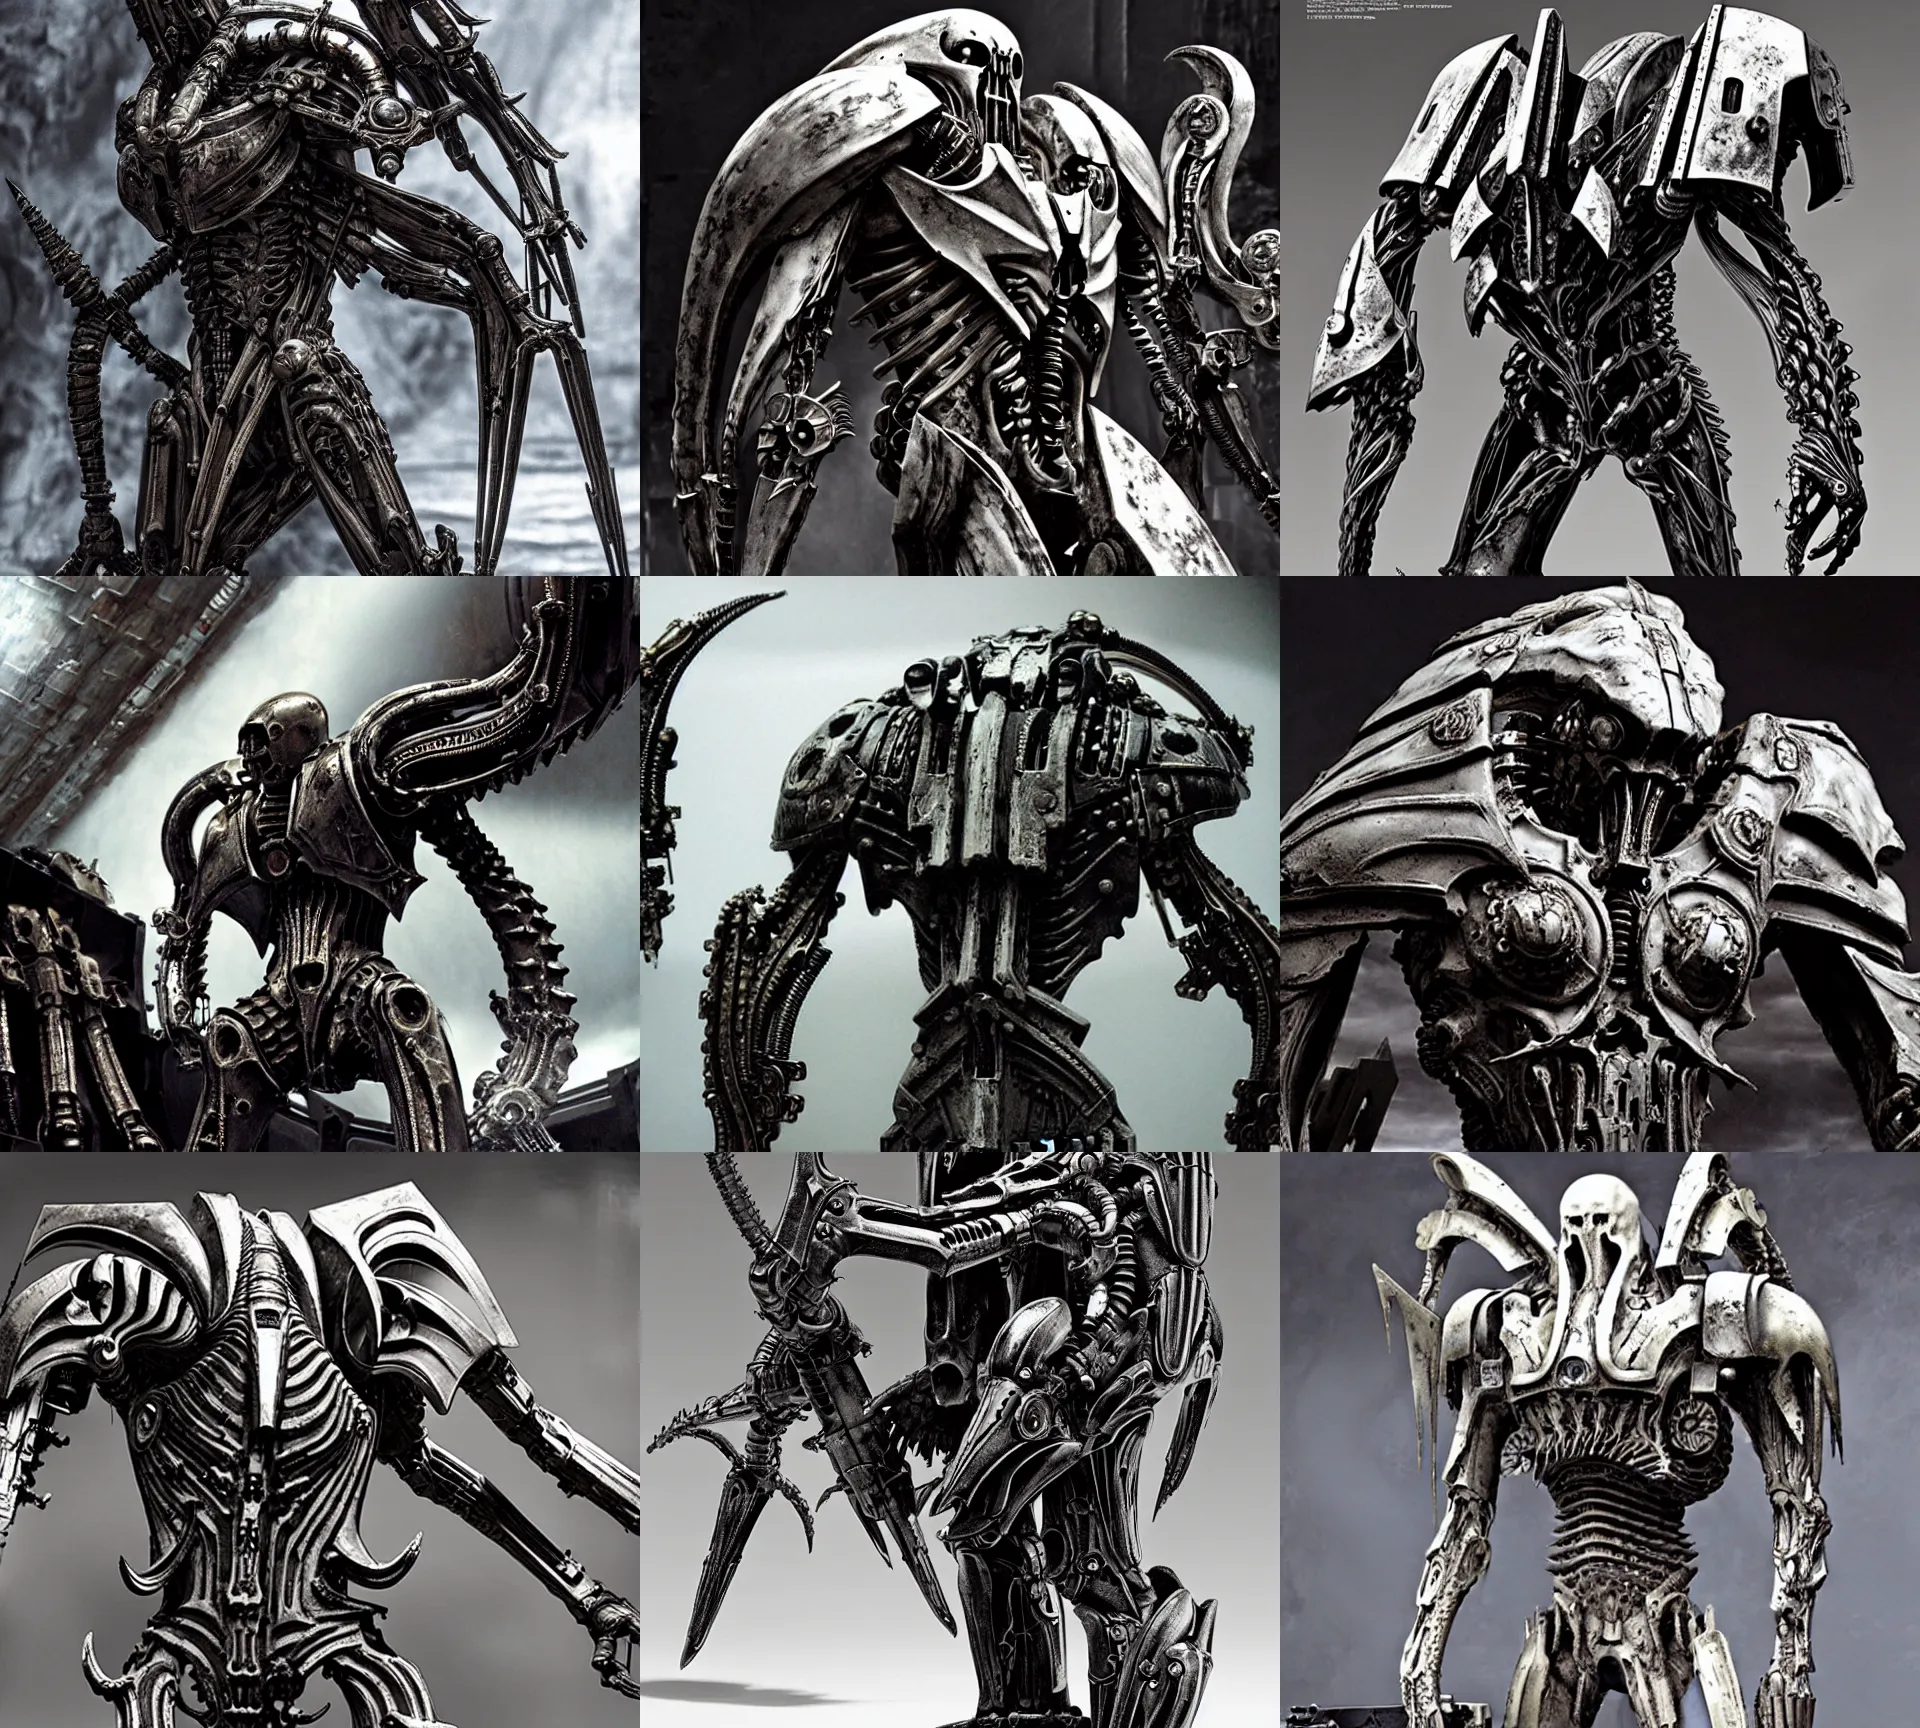 Prompt: frame from prometheus movie, wh 4 0 k art, forgefiend metal couture by giger, knights of sidonia crimson